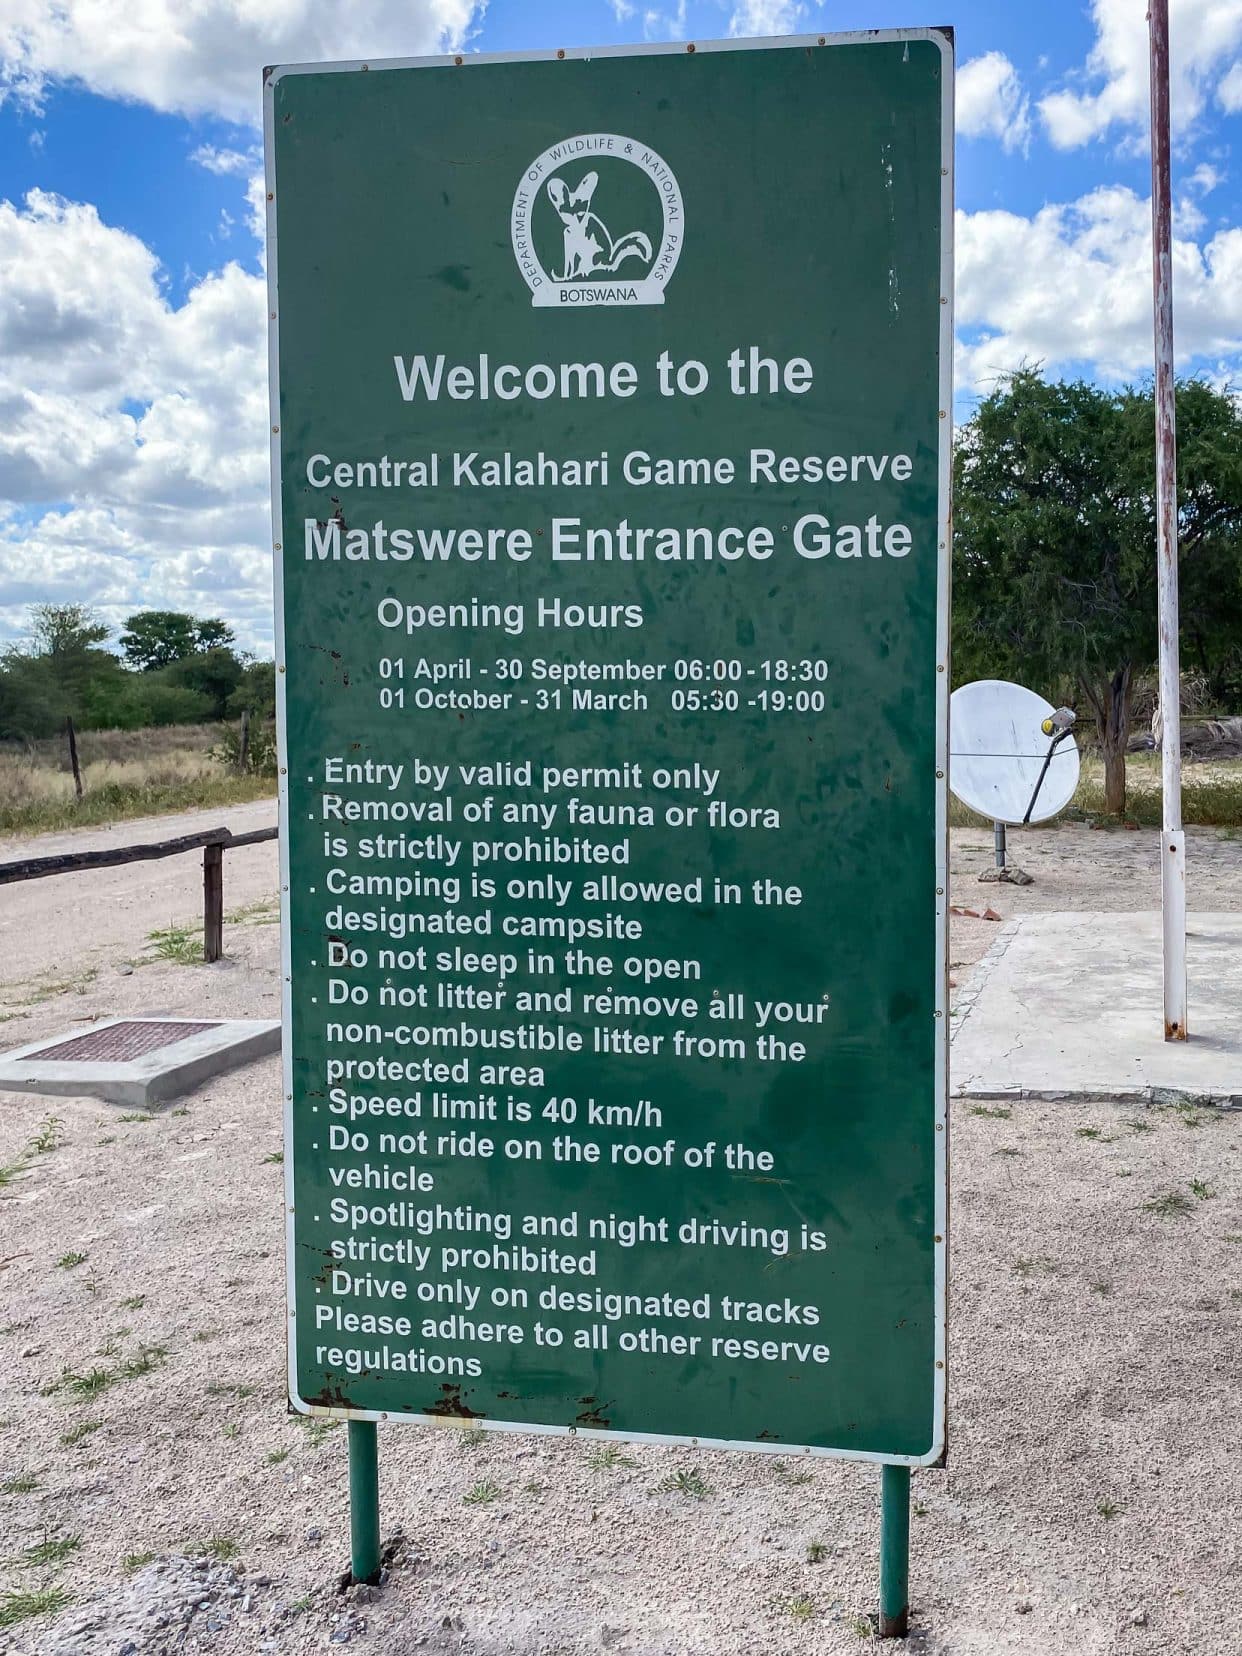 park rules displayed on a sign